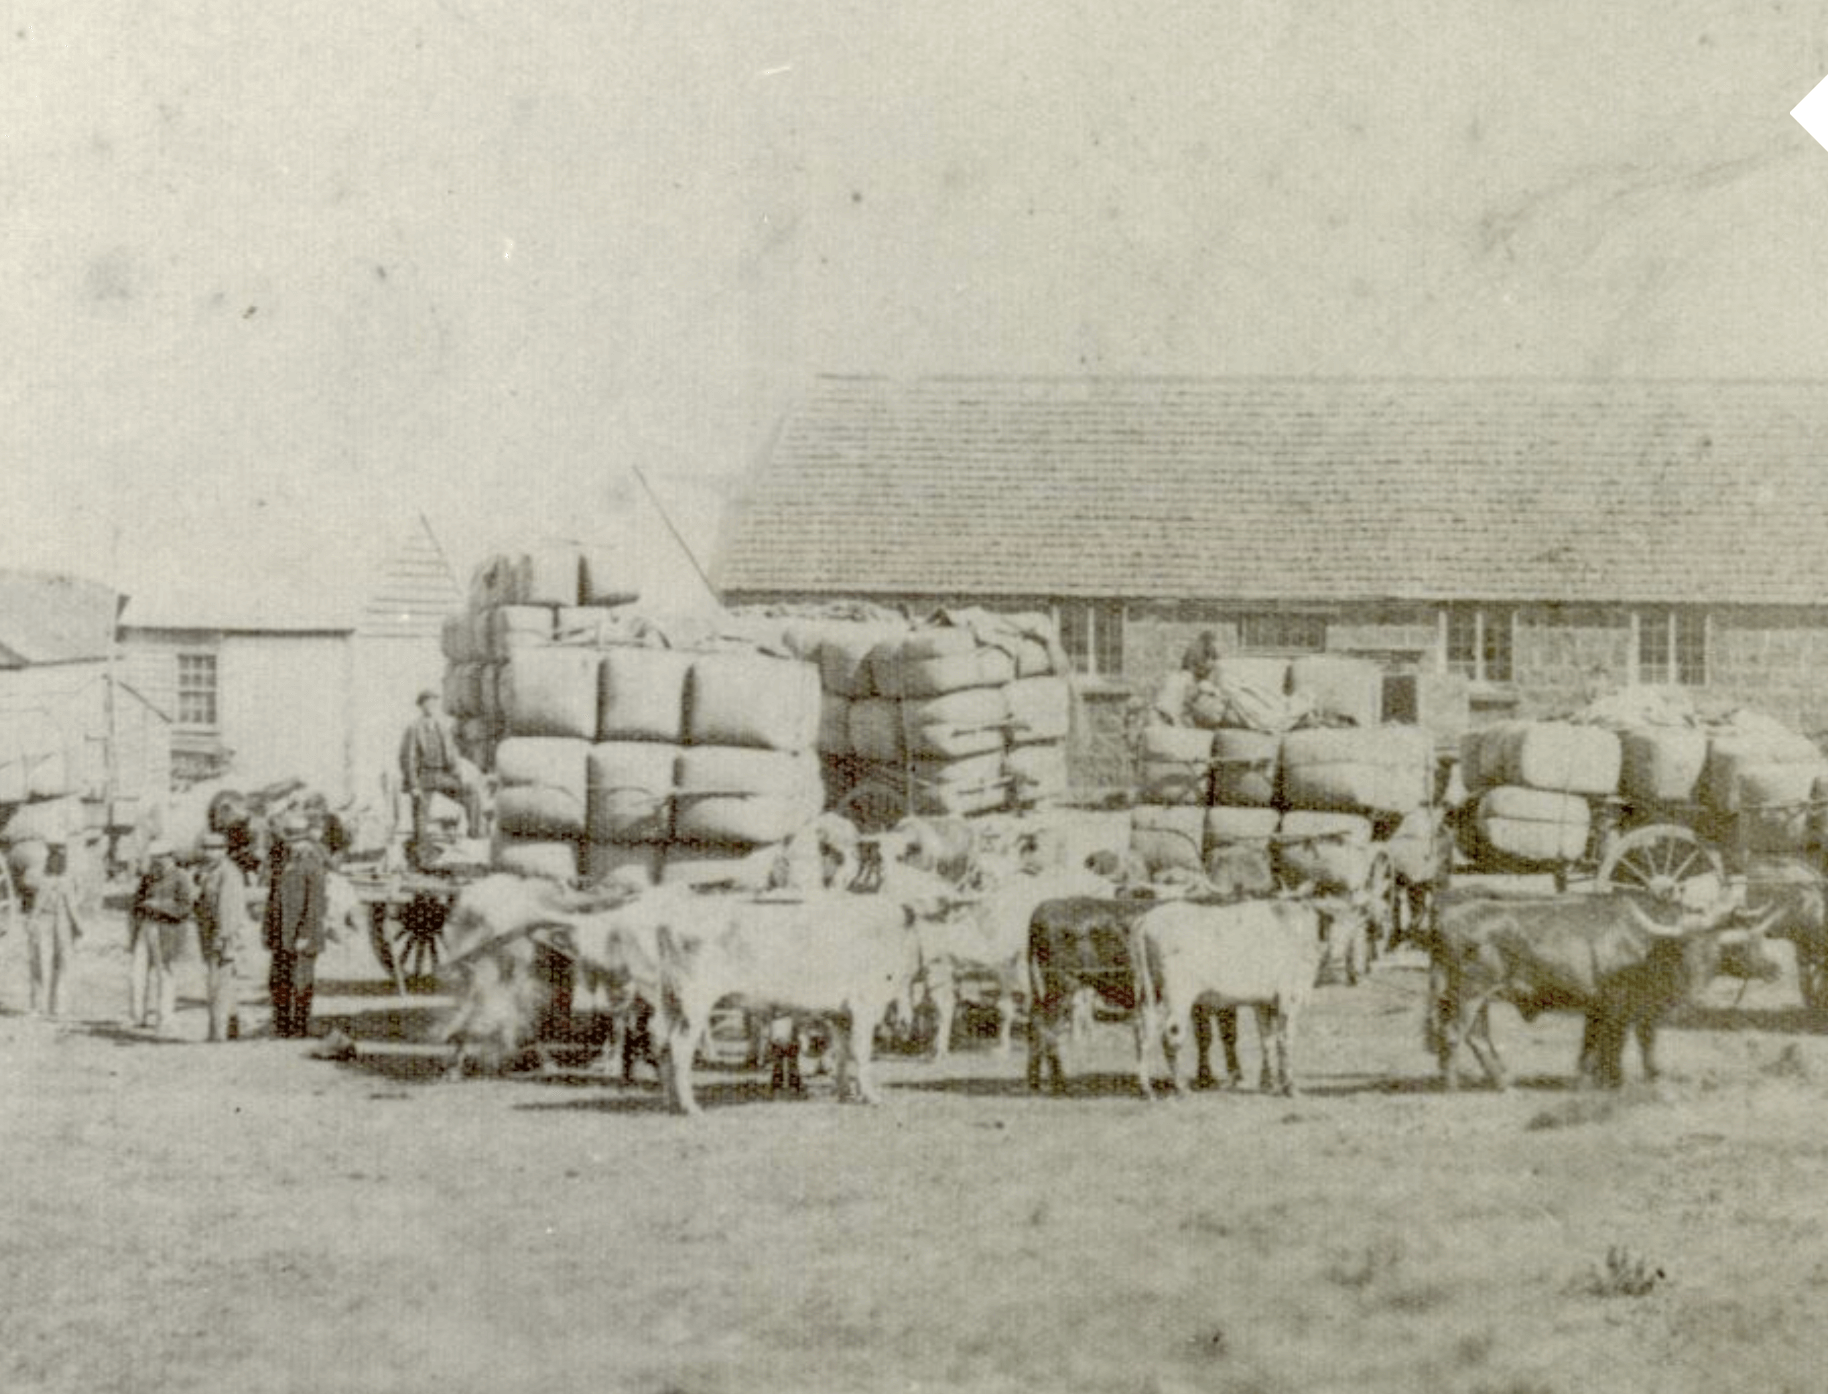 historical photo of a number of bullock wagons ready to transport bags of wheat and wool.